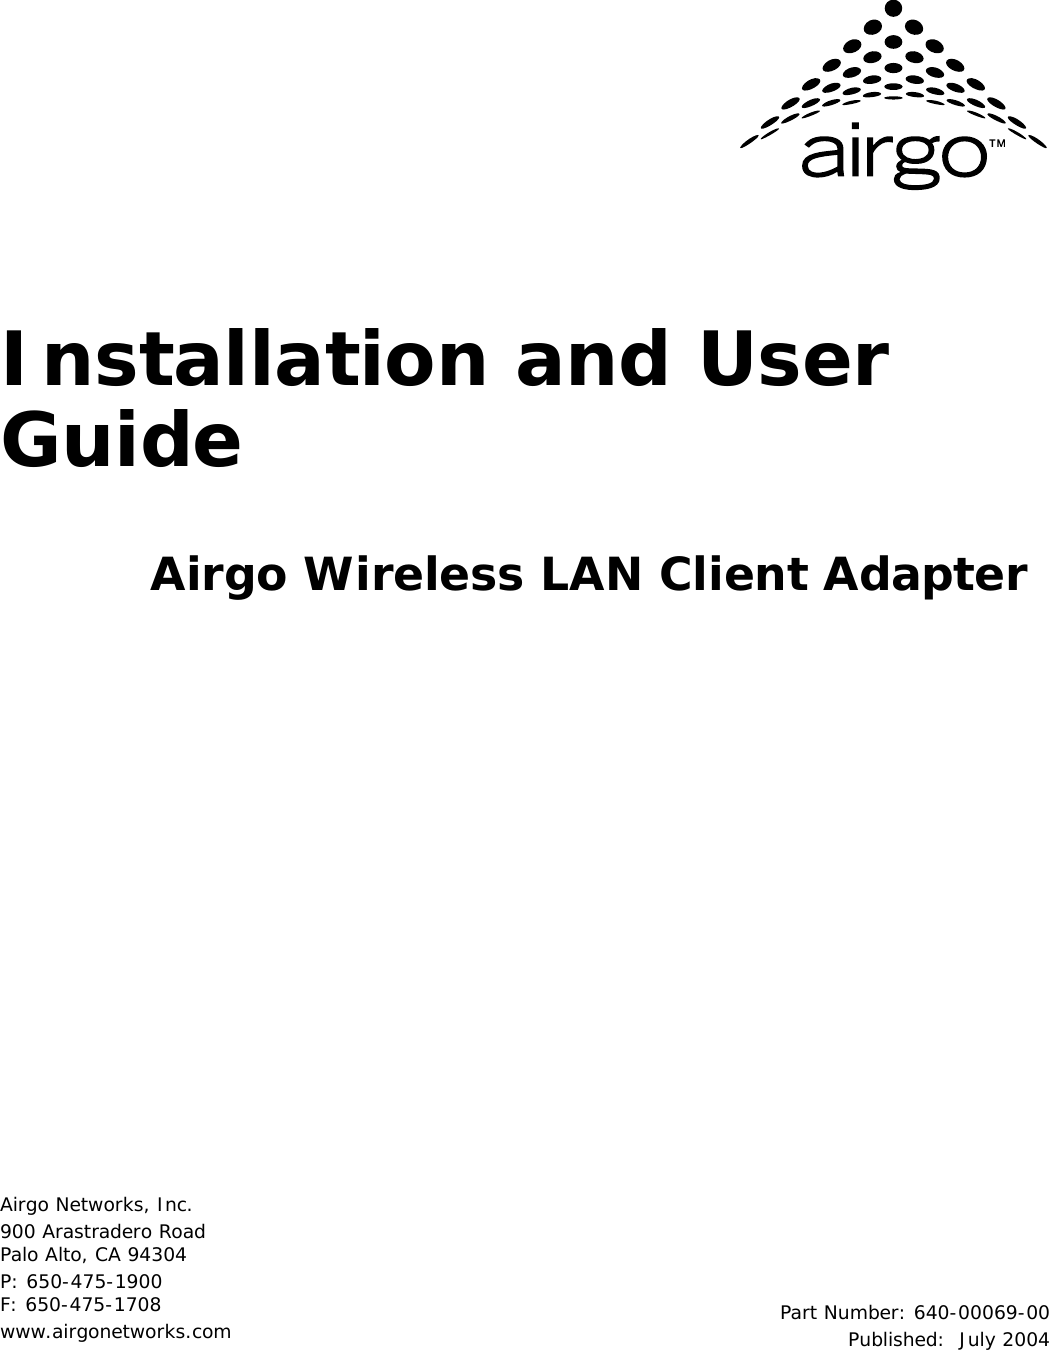 Airgo Networks, Inc.900 Arastradero RoadPalo Alto, CA 94304P: 650-475-1900F: 650-475-1708www.airgonetworks.com Part Number: 640-00069-00Published: July 2004Installation and User GuideAirgo Wireless LAN Client Adapter